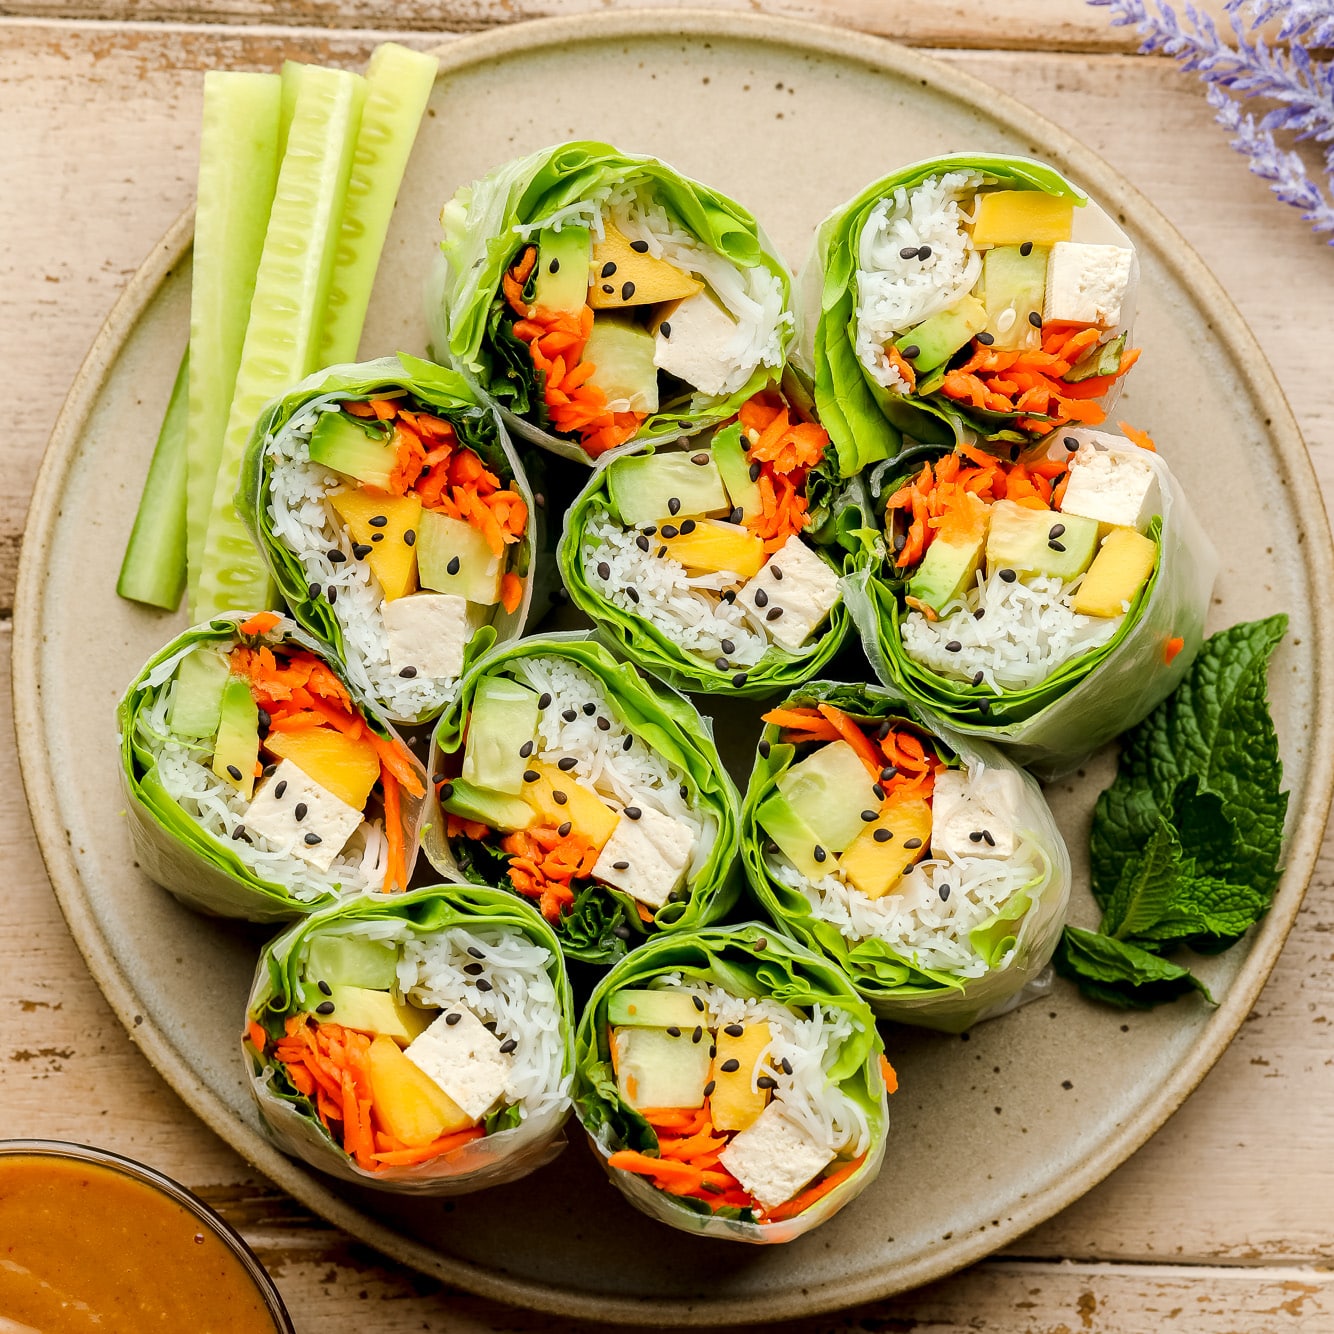 Healthy Lunches With Planet Box. — Watermeloneggrolls